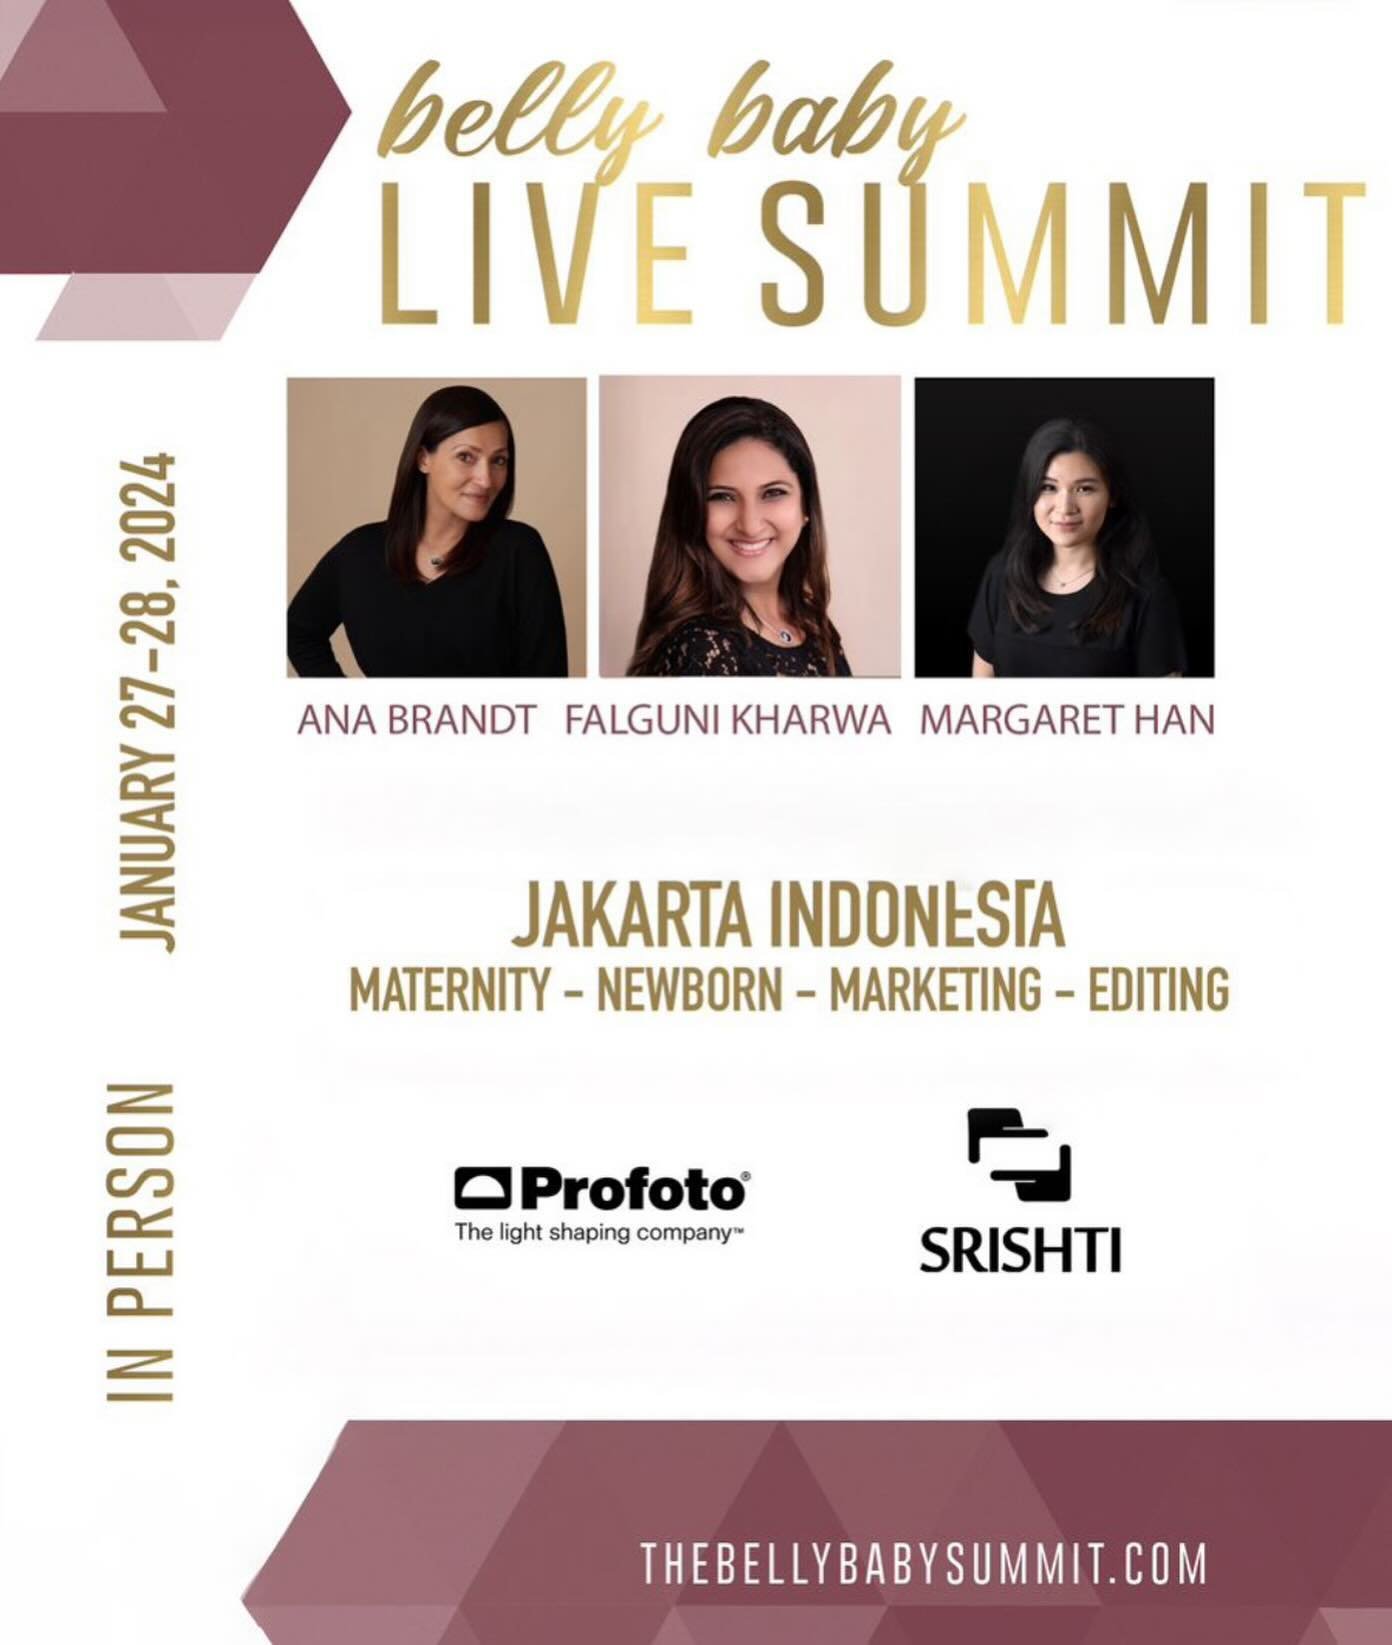 We are preparing for the Summit in Indonesia at the end of the month. Spend two days learning and growing. 
Visit the website for the schedule- 
https://www.thebellybabysummitlive.com/asia-summit

#indonesiasummit
#photographersummit
#maternitysummit